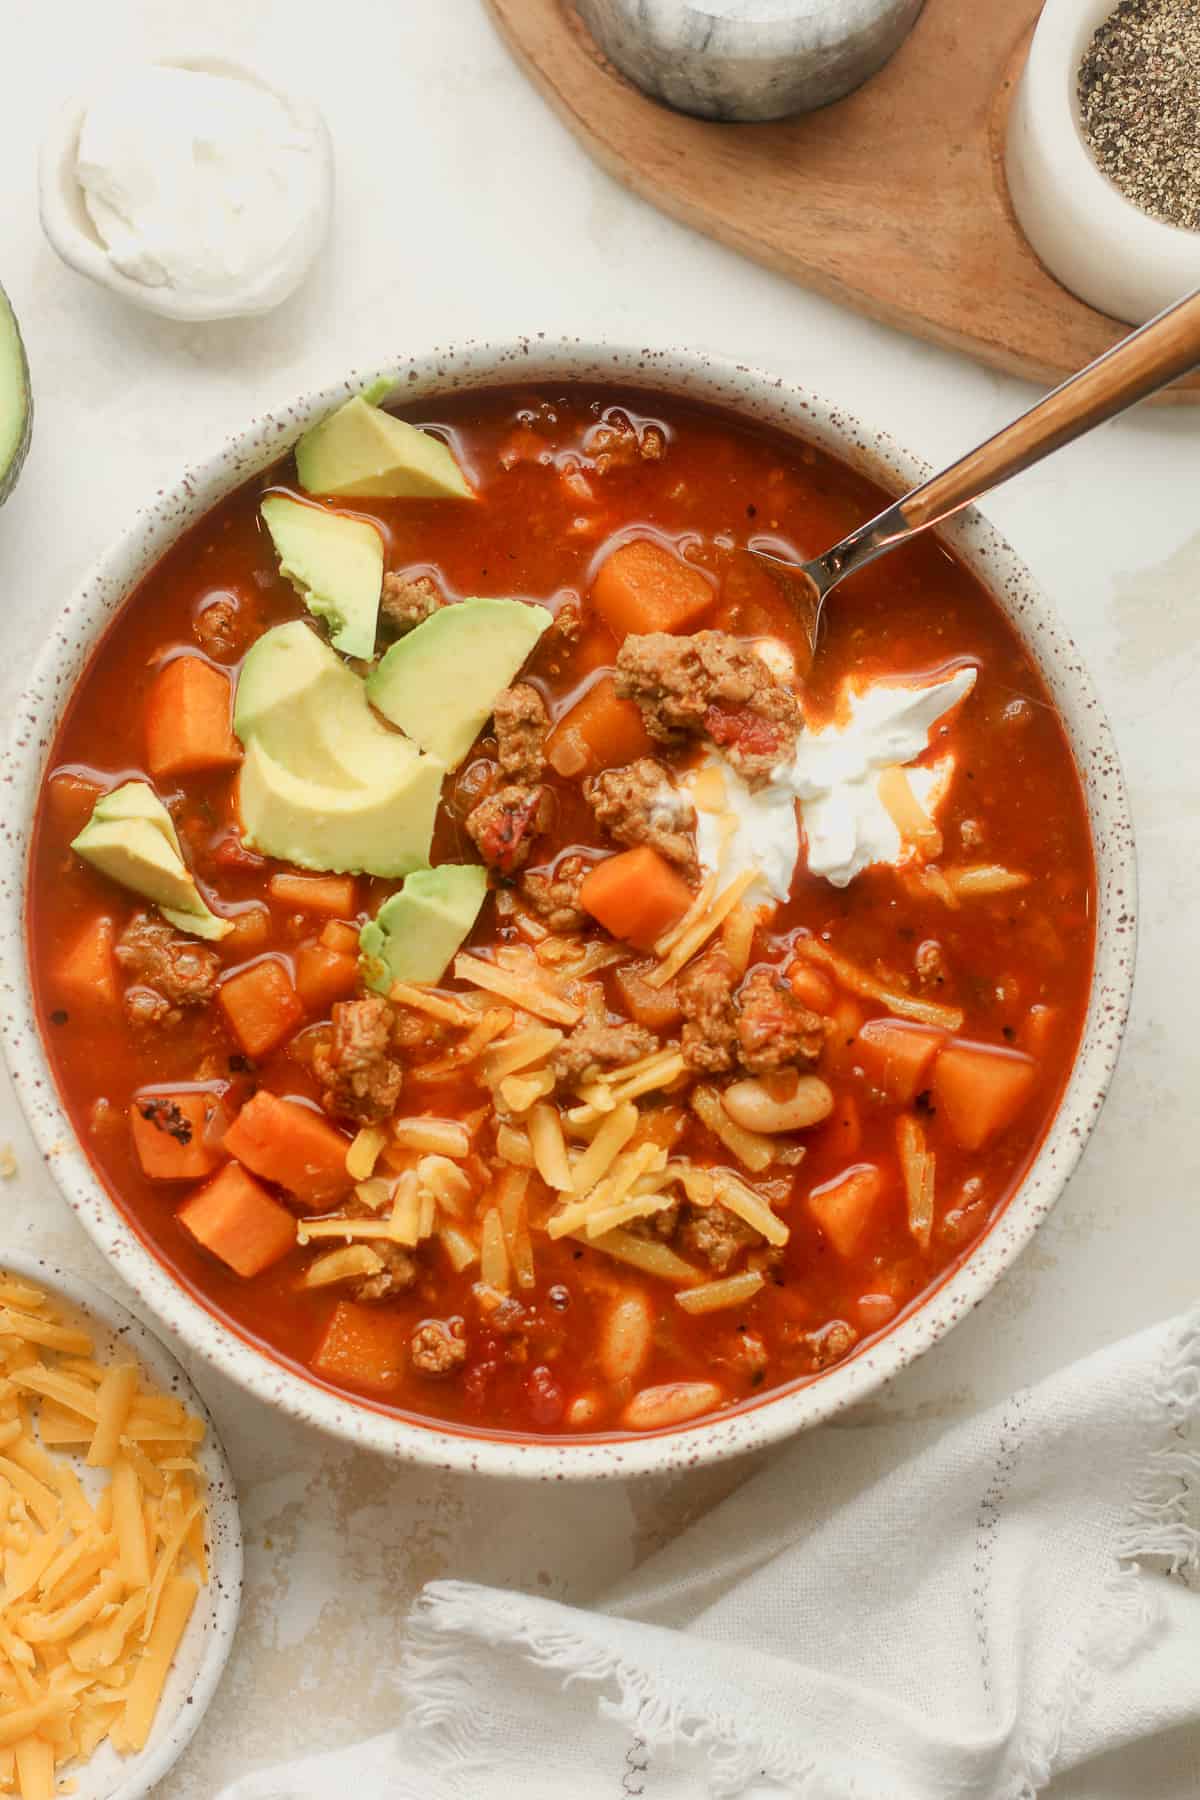 A bowl of turkey chili with sweet potatoes and other toppings.